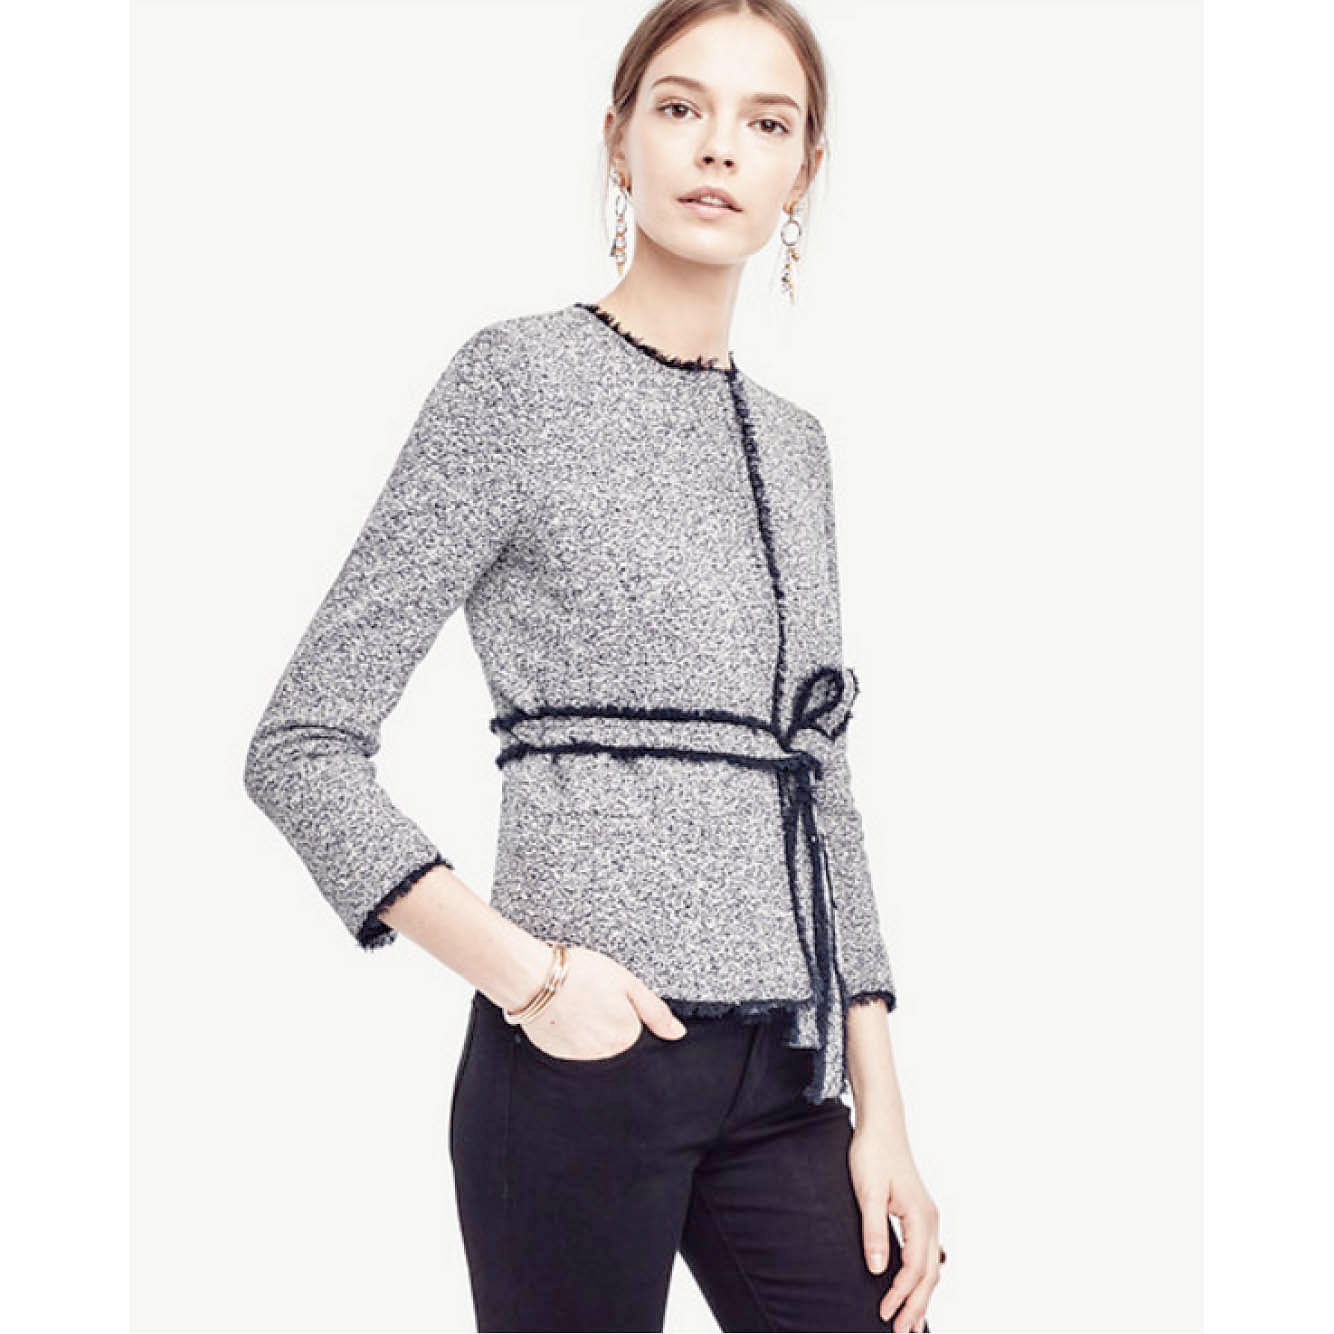 Petite Belted Tweed Jacket, $367.30, from www.anntaylor.com